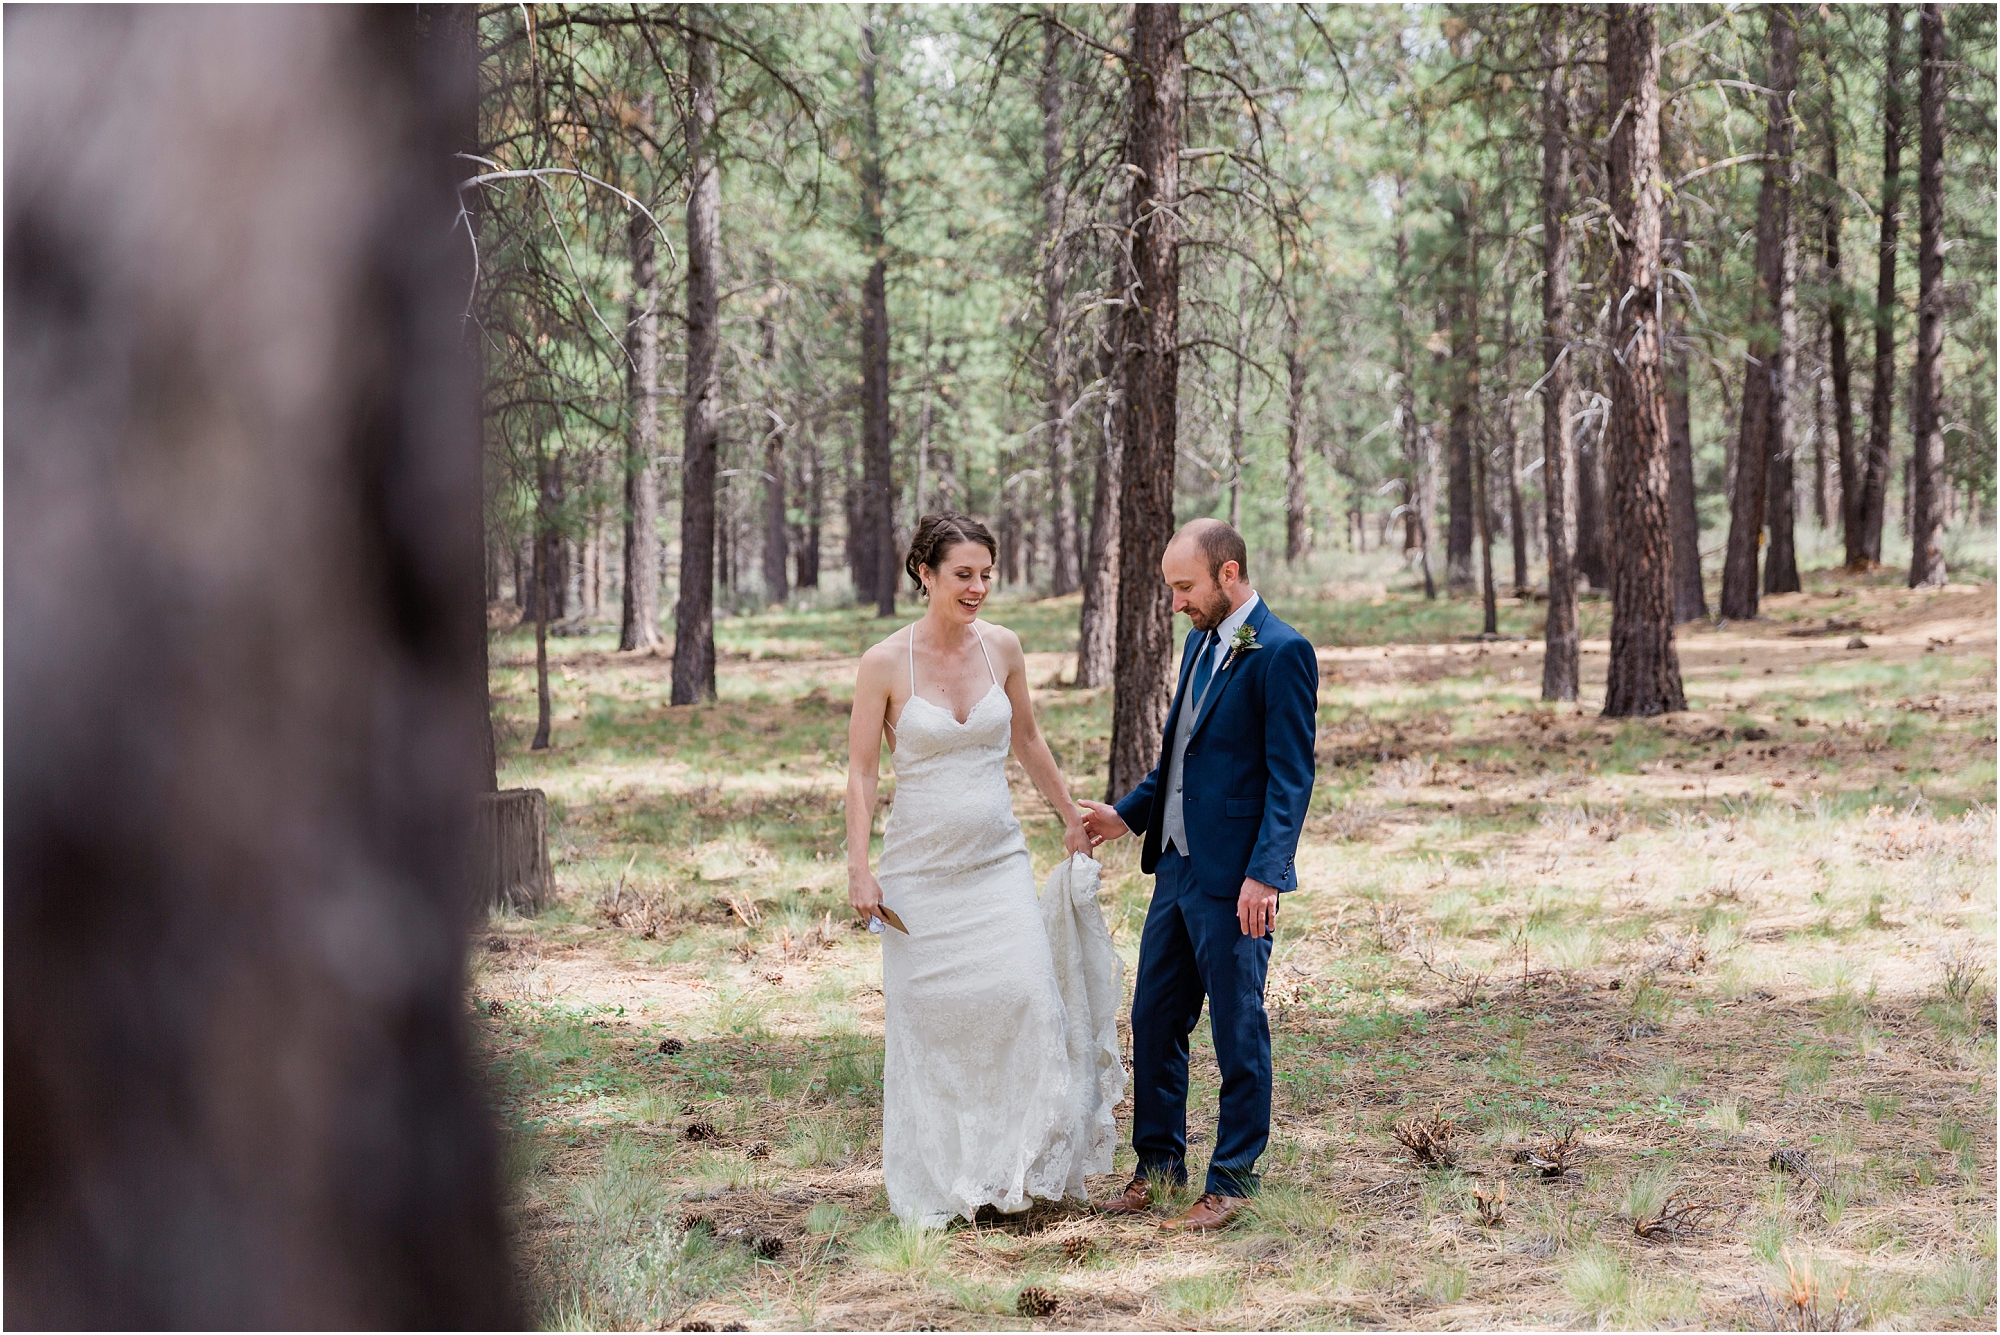 A gorgeous bride wearing BHLDN and a groom in a cobalt blue suit from Men's Warehouse enjoy their first look among the pine trees in Central Oregon. | Erica Swantek Photography